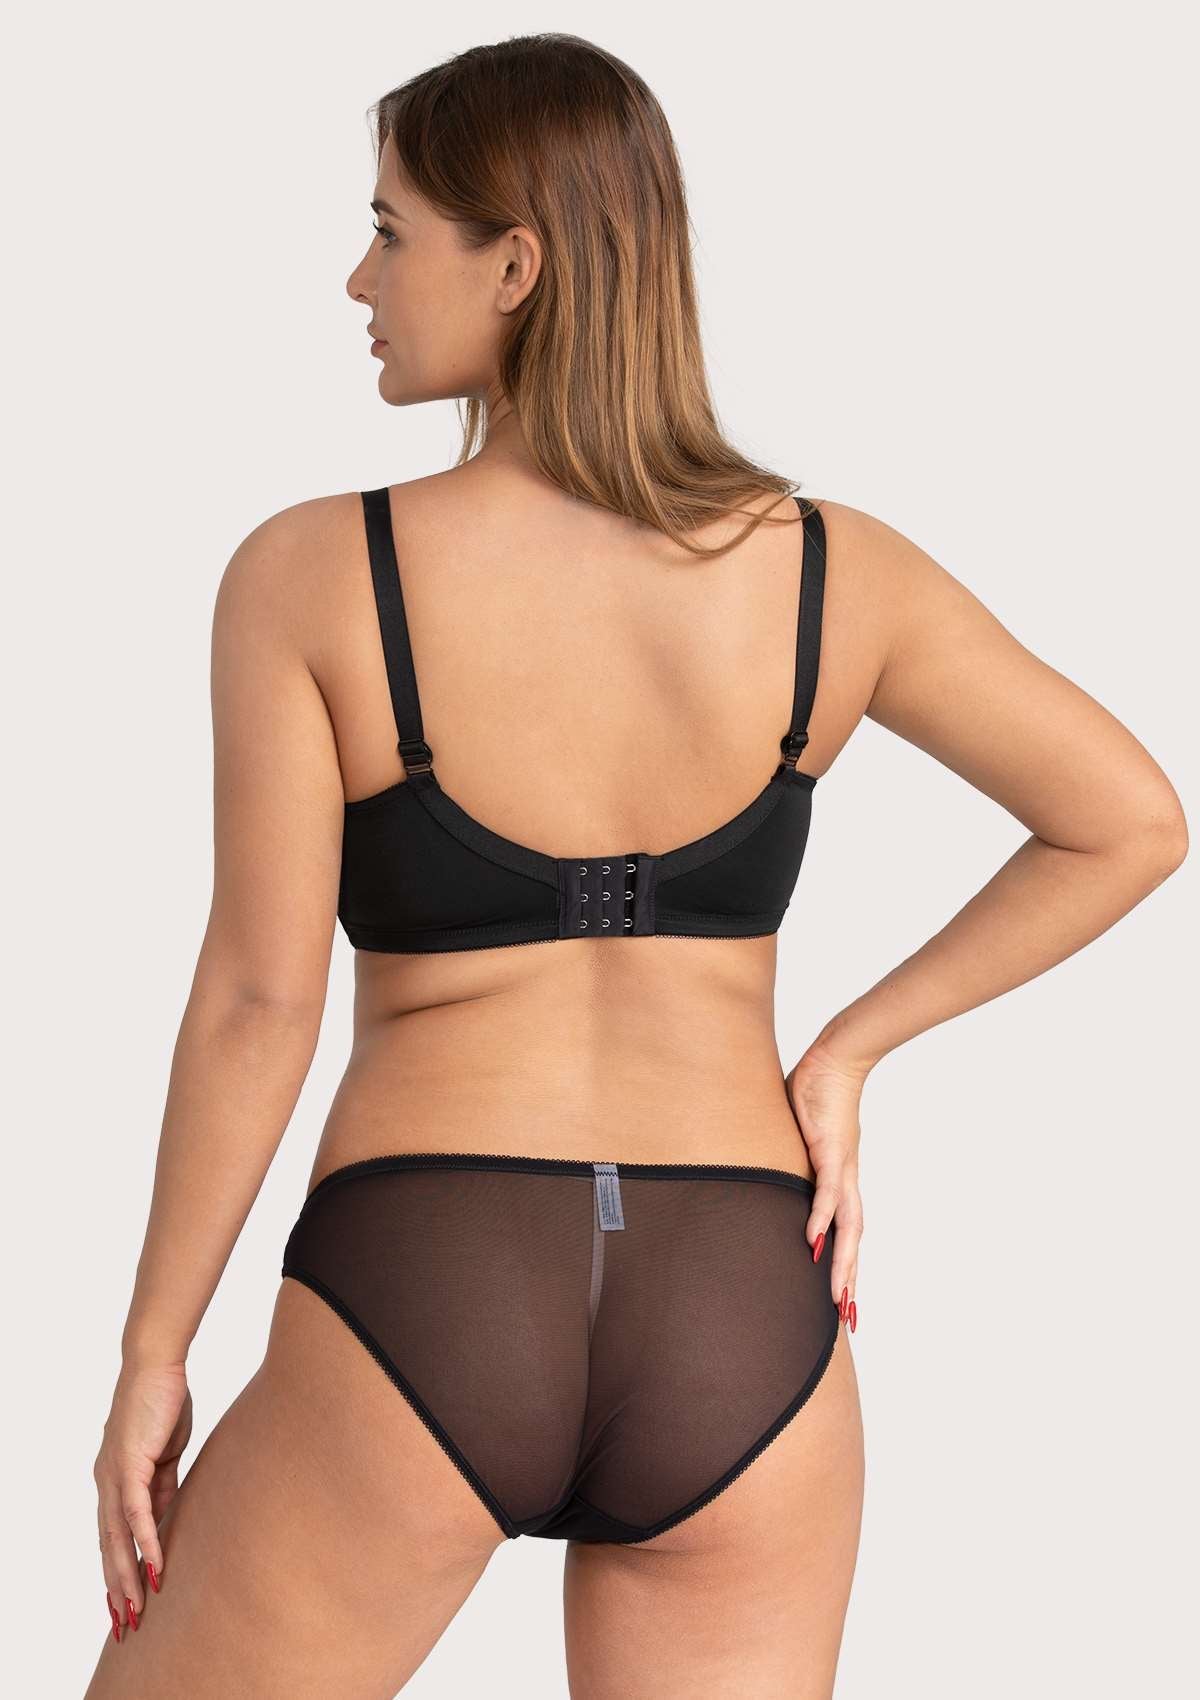 HSIA Anemone Lace Bra And Panties: Back Support Wired Bra - Black / 40 / DD/E